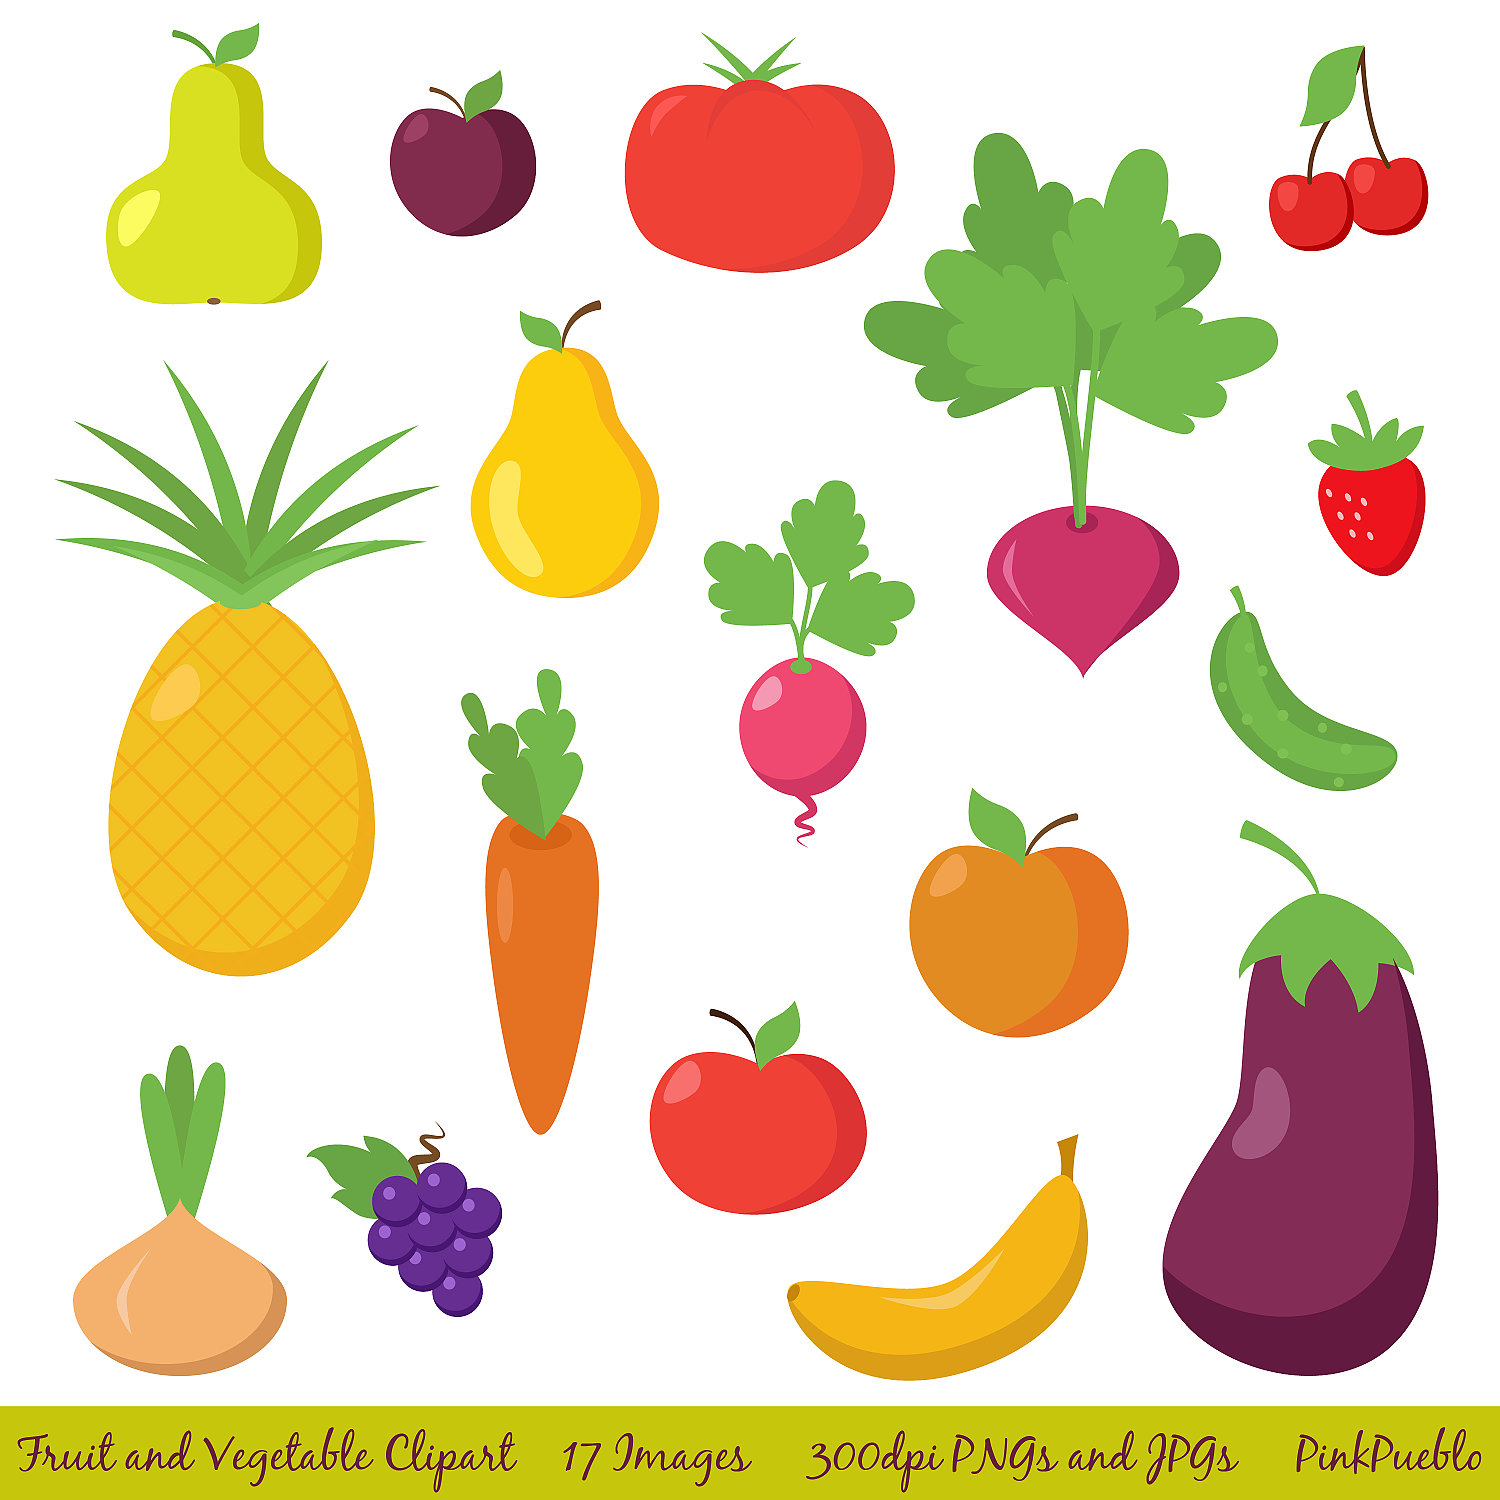 Fruit and Vegetable Clipart Clip Art, Fruit Clipart Clip Art, Vegetable Clipart Clip Art - Commercial and Personal Use